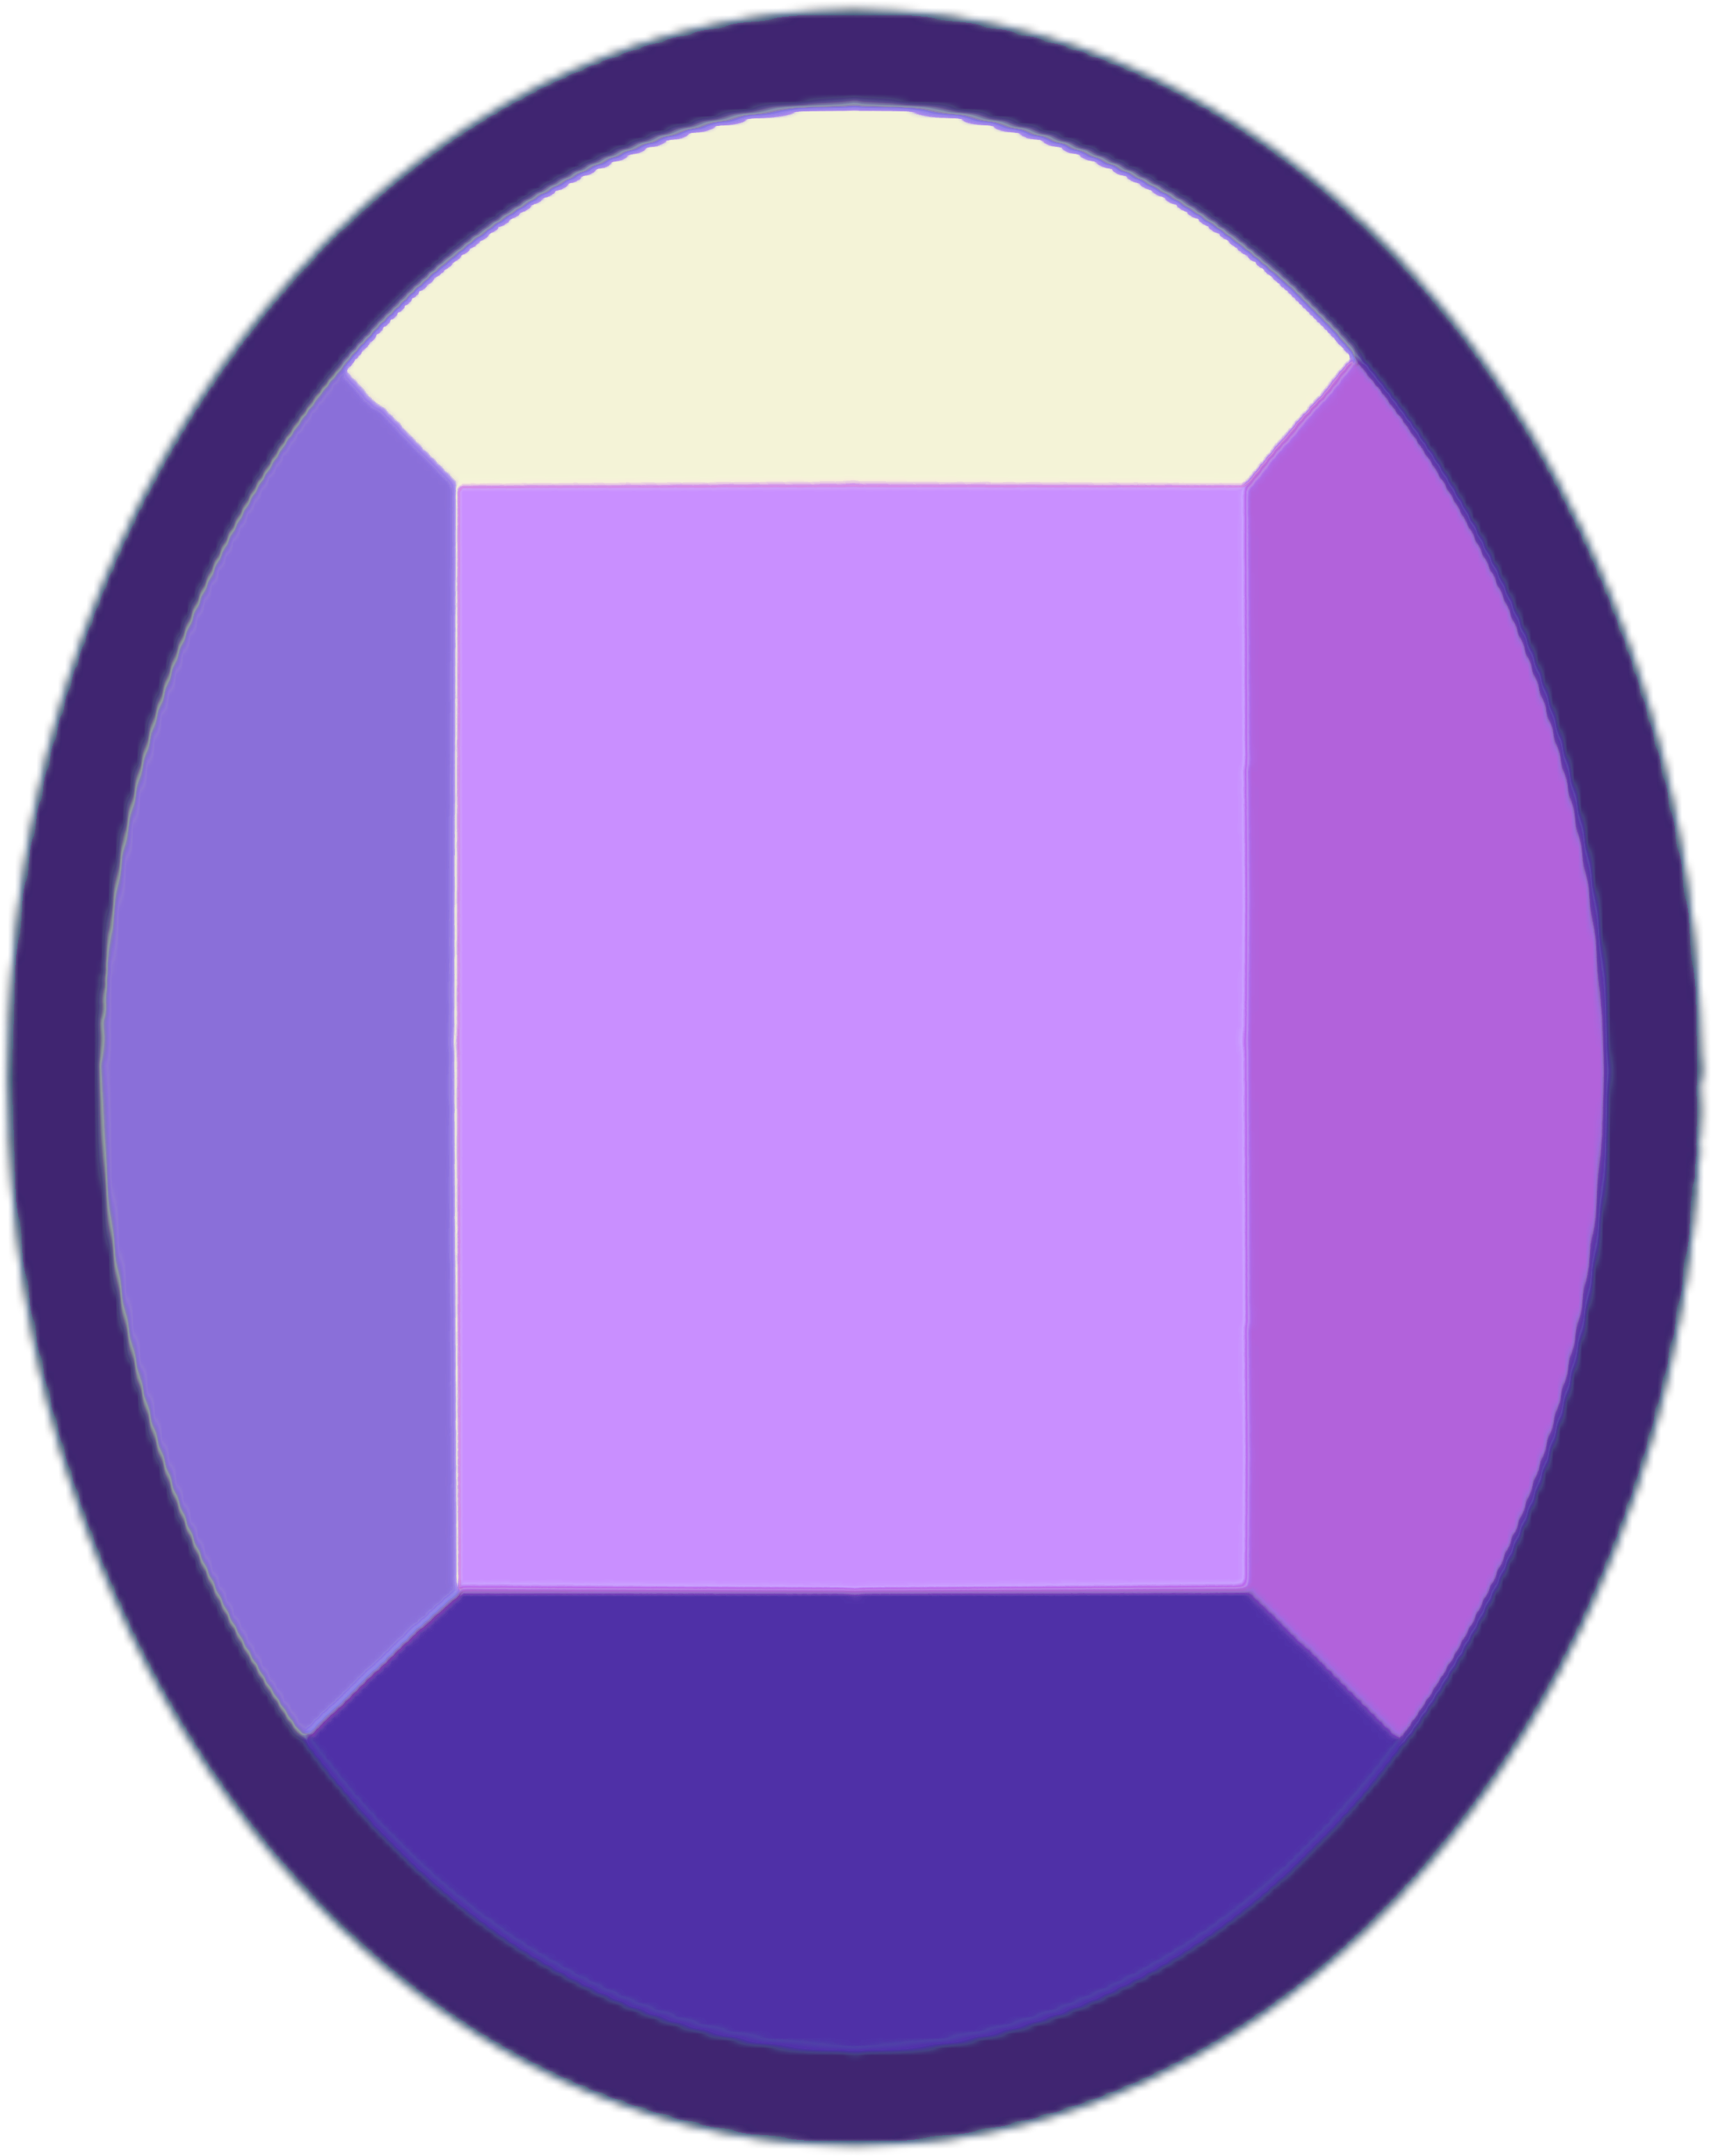 Orthoclase's Gemstone Is Located On Her Chest - Circle (2480x3508)